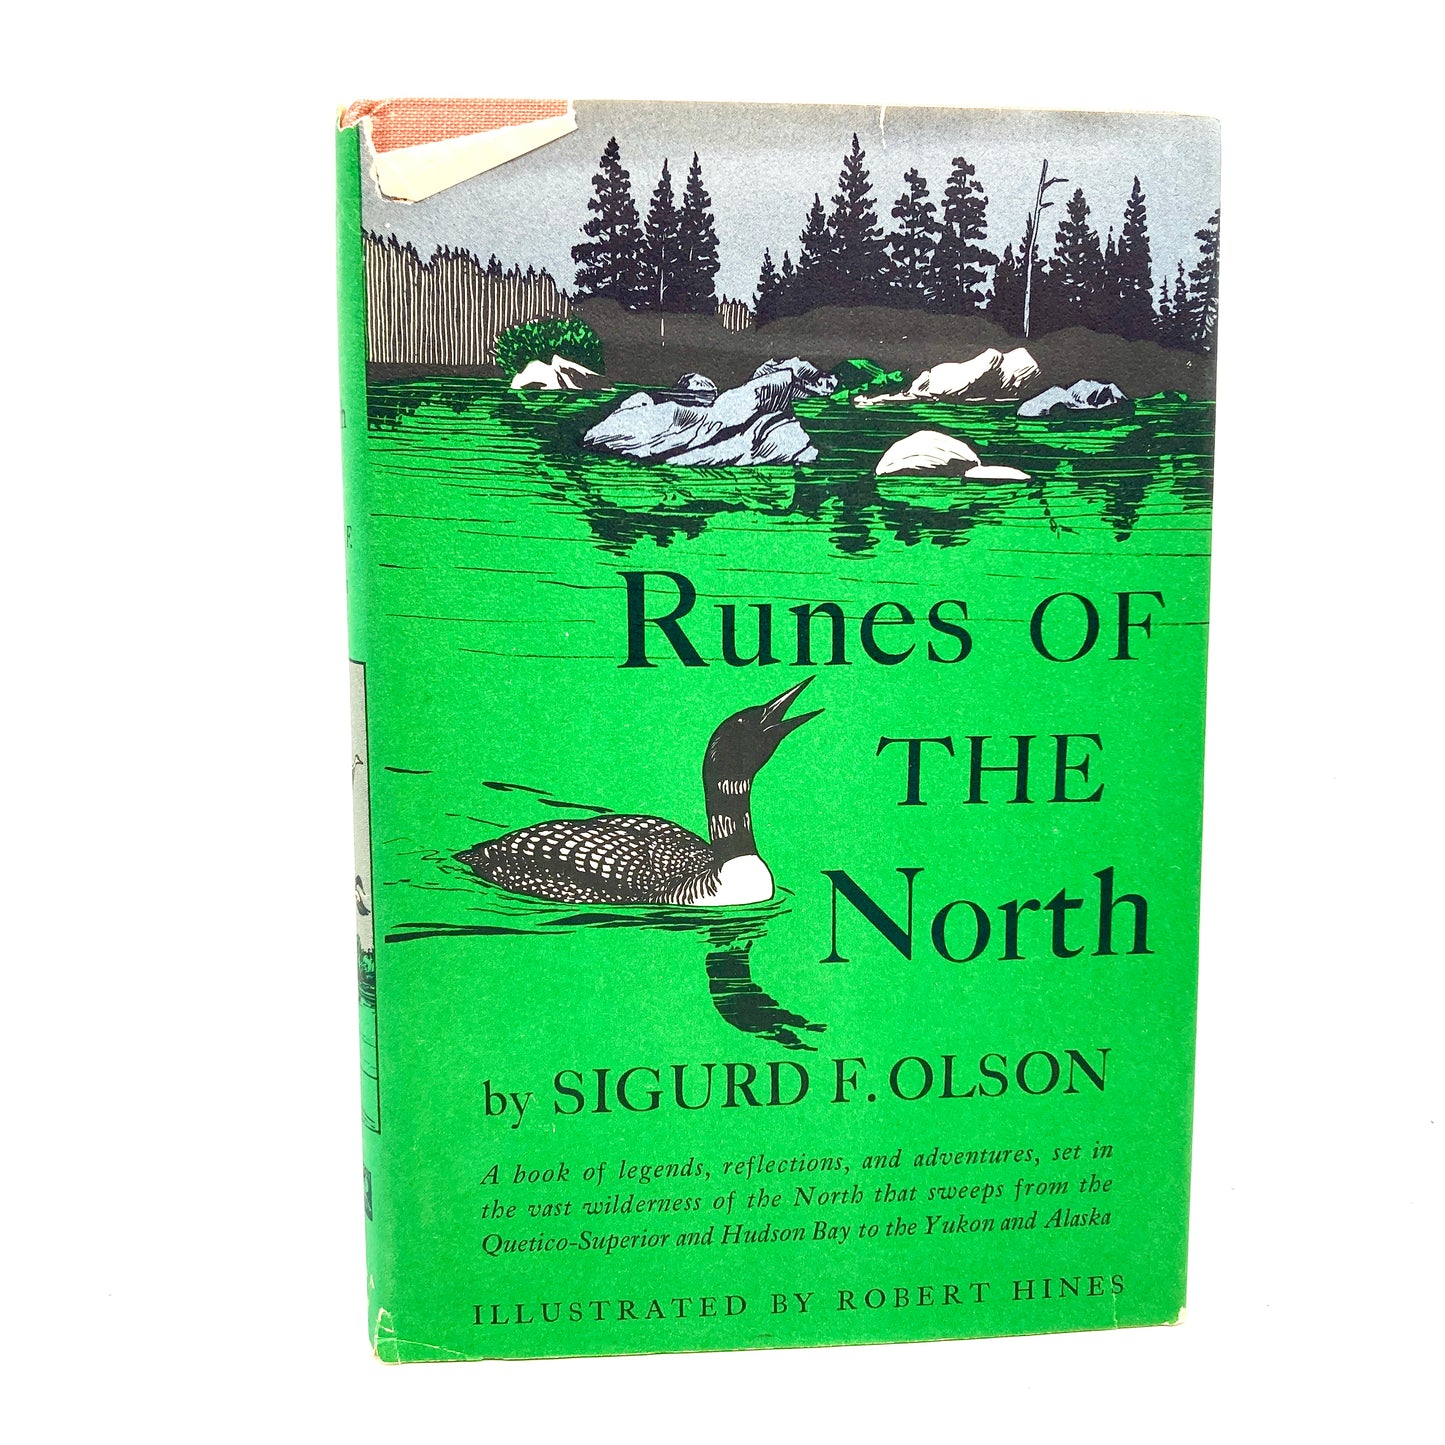 OLSON, Sigurd F. "Runes of the North" [Alfred A. Knopf, 1964] - Buzz Bookstore